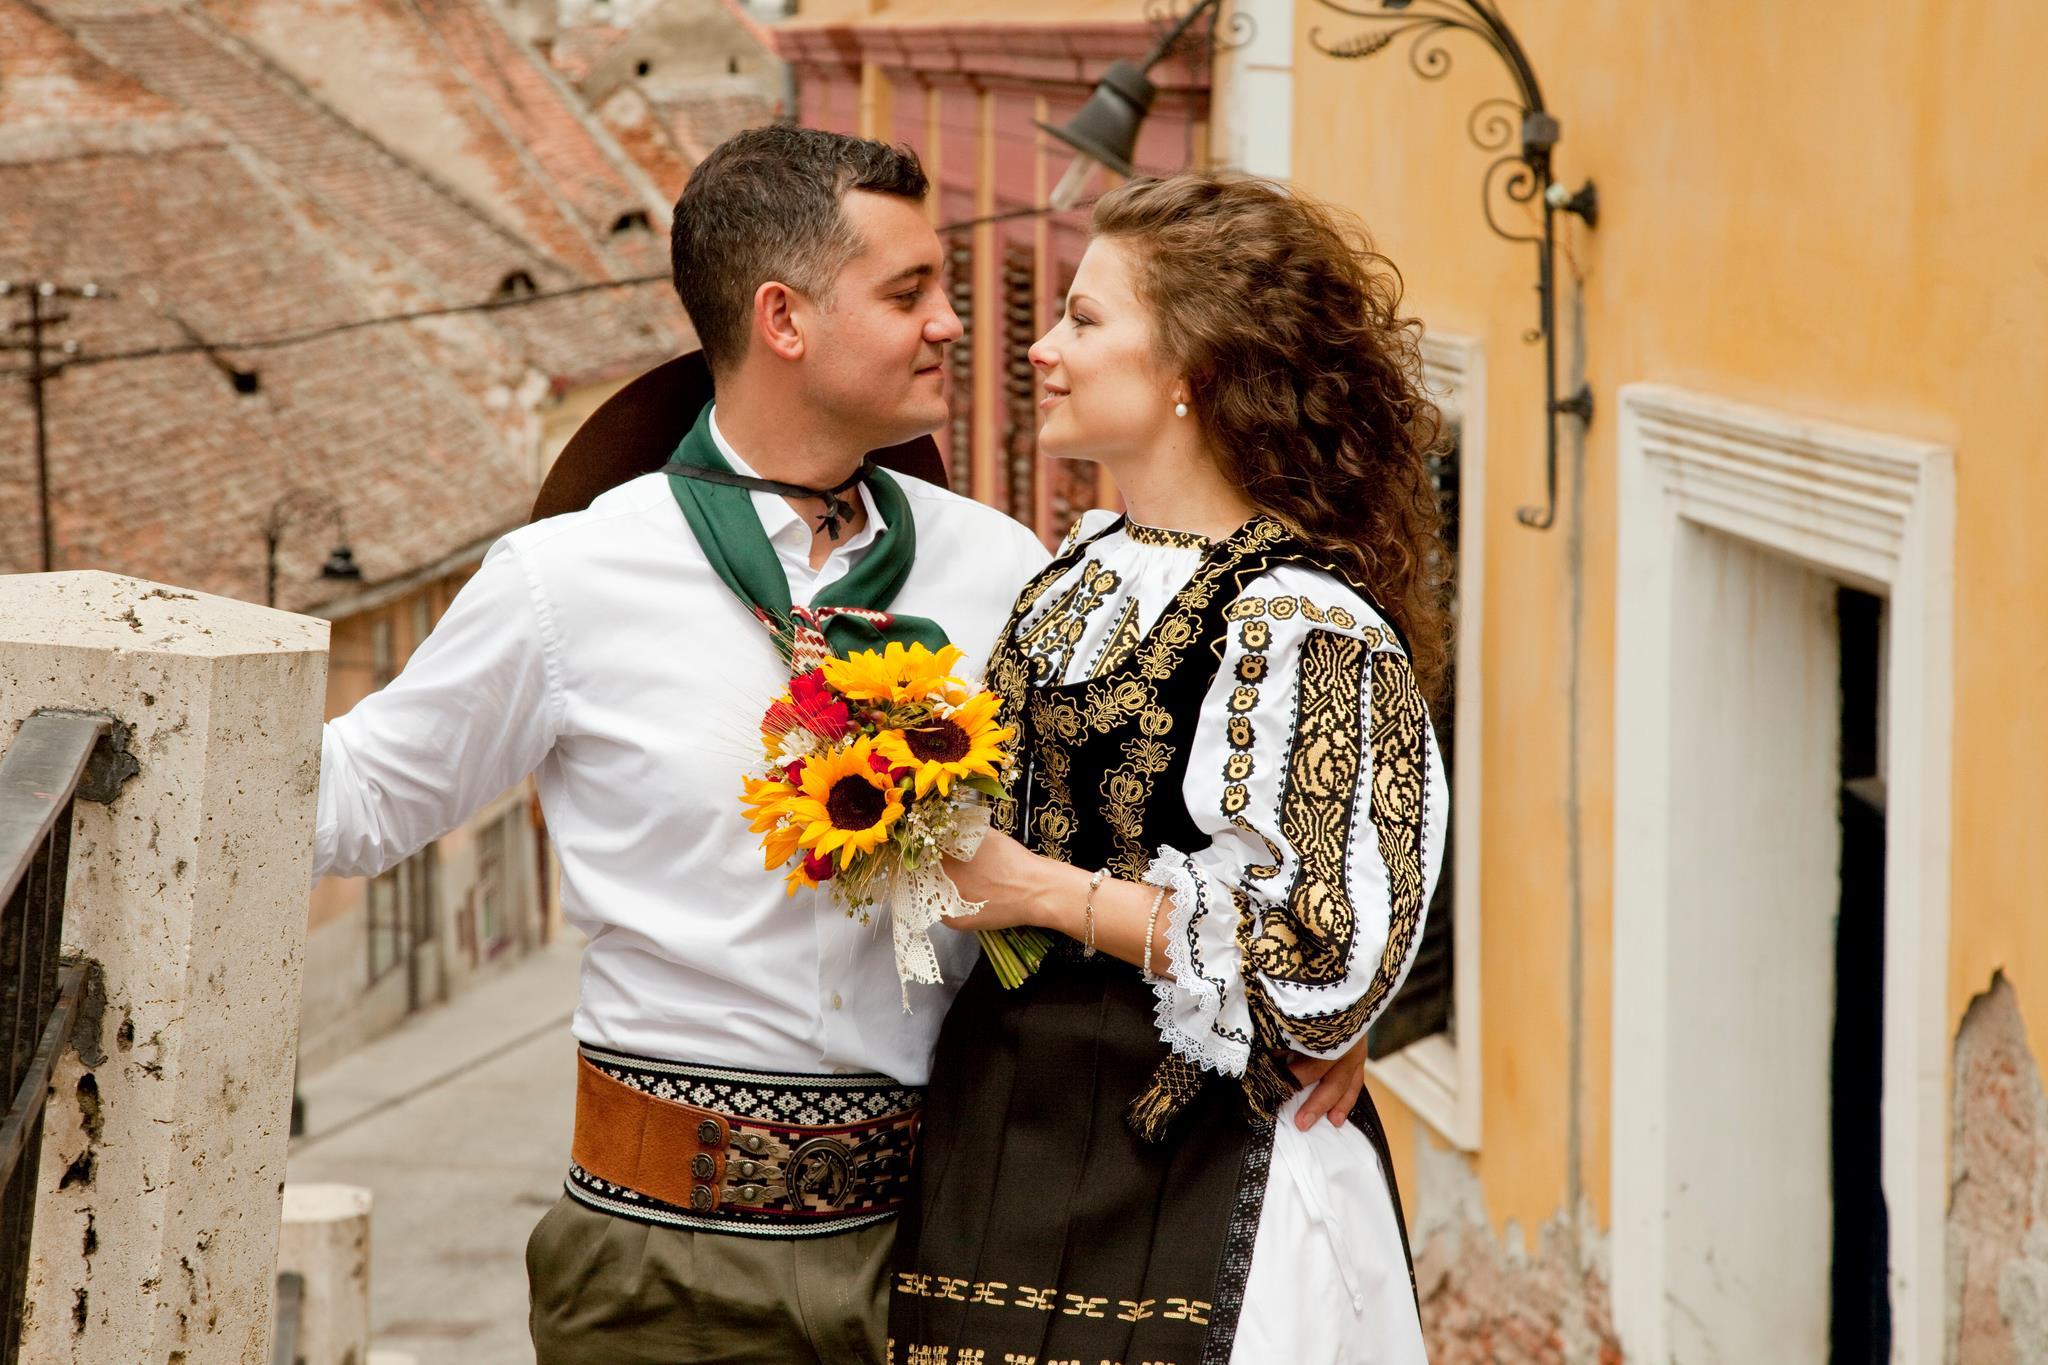 Ioana and JP in their Brazilian-Romanian national costumes during the civil wedding ceremony